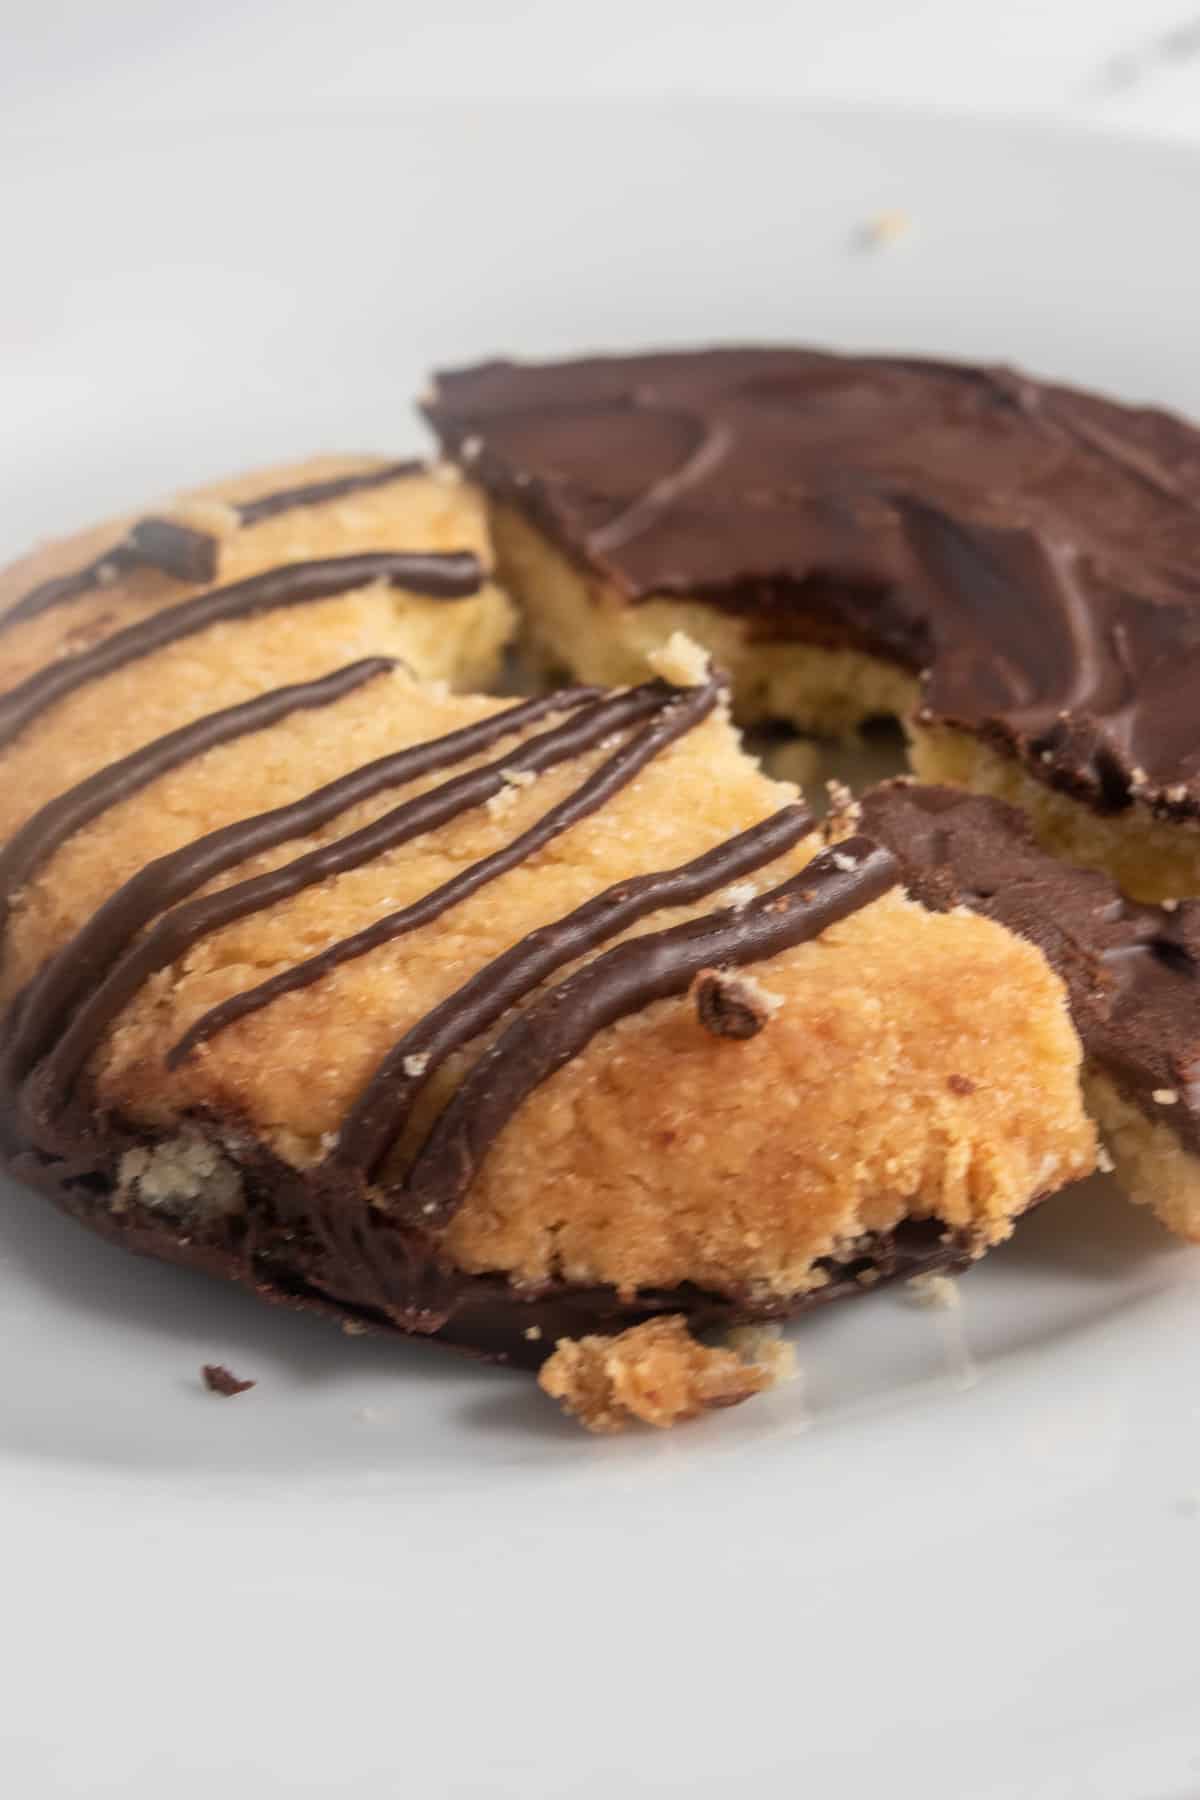 A crumbly cookie broken in half. One of the halves is upside down, revealing the chocolate bottom.